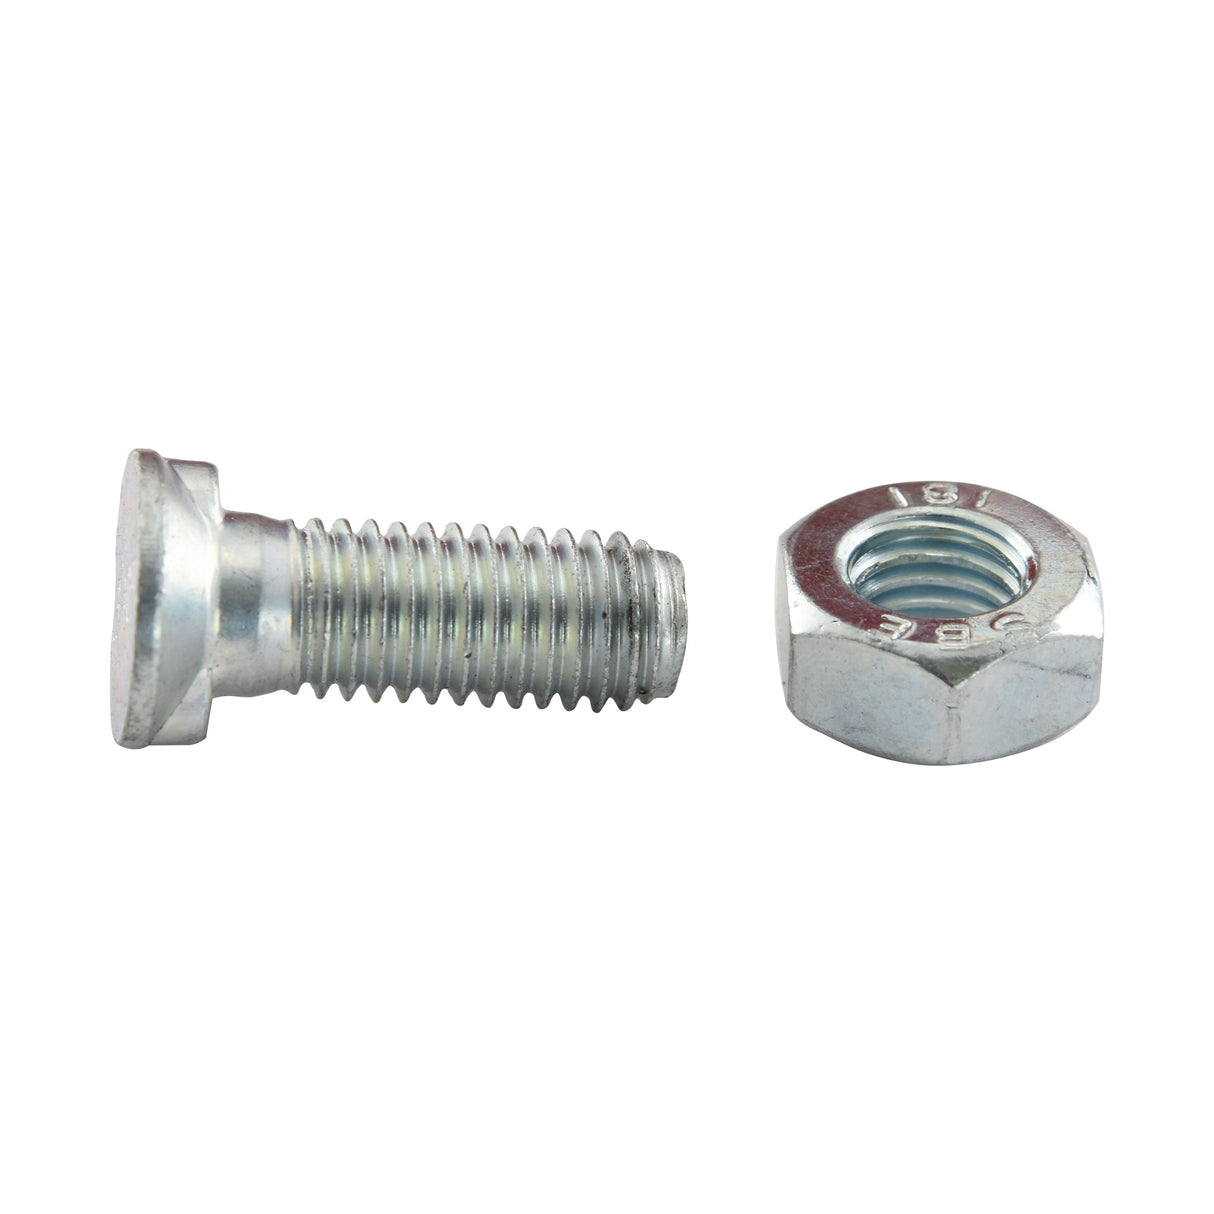 Countersunk Head Bolt 2 Nibs With Nut (TF2E) - M11 x 50mm, Tensile strength 10.9 (25 pcs. Box)
 - S.7995 - Farming Parts